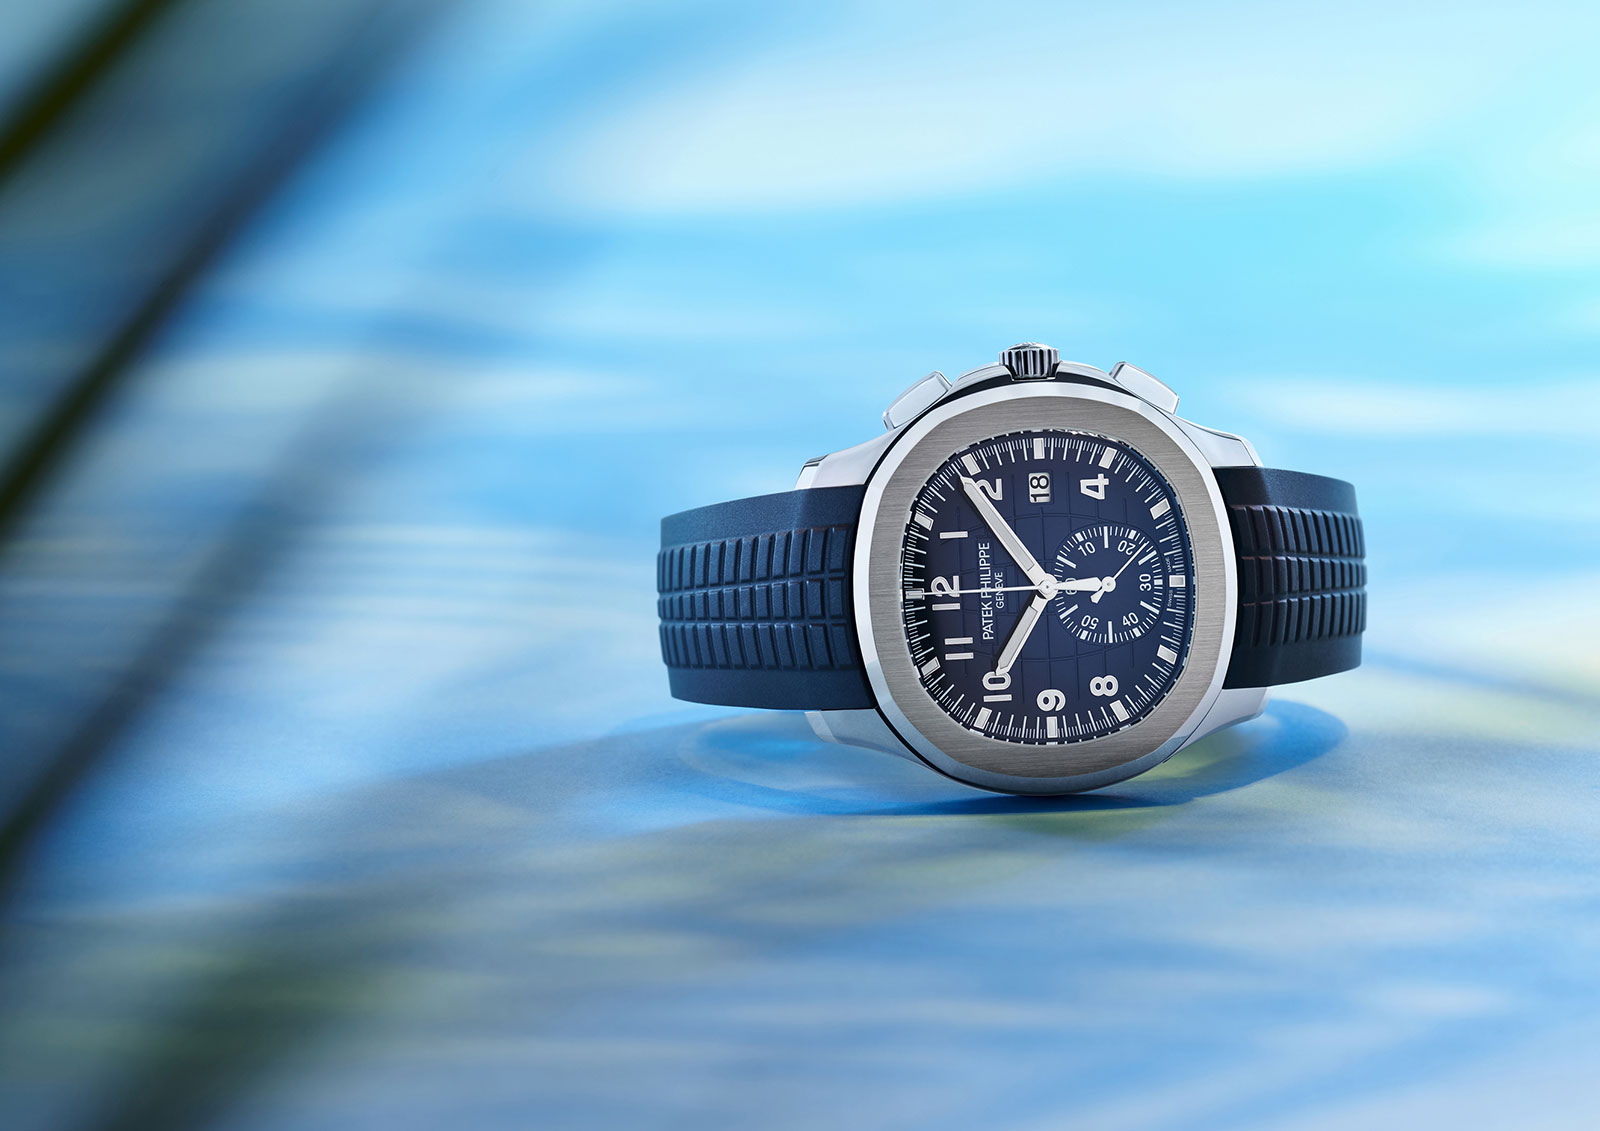 Copy Patek Philippe Aquanaut Chronograph in olive green or blue